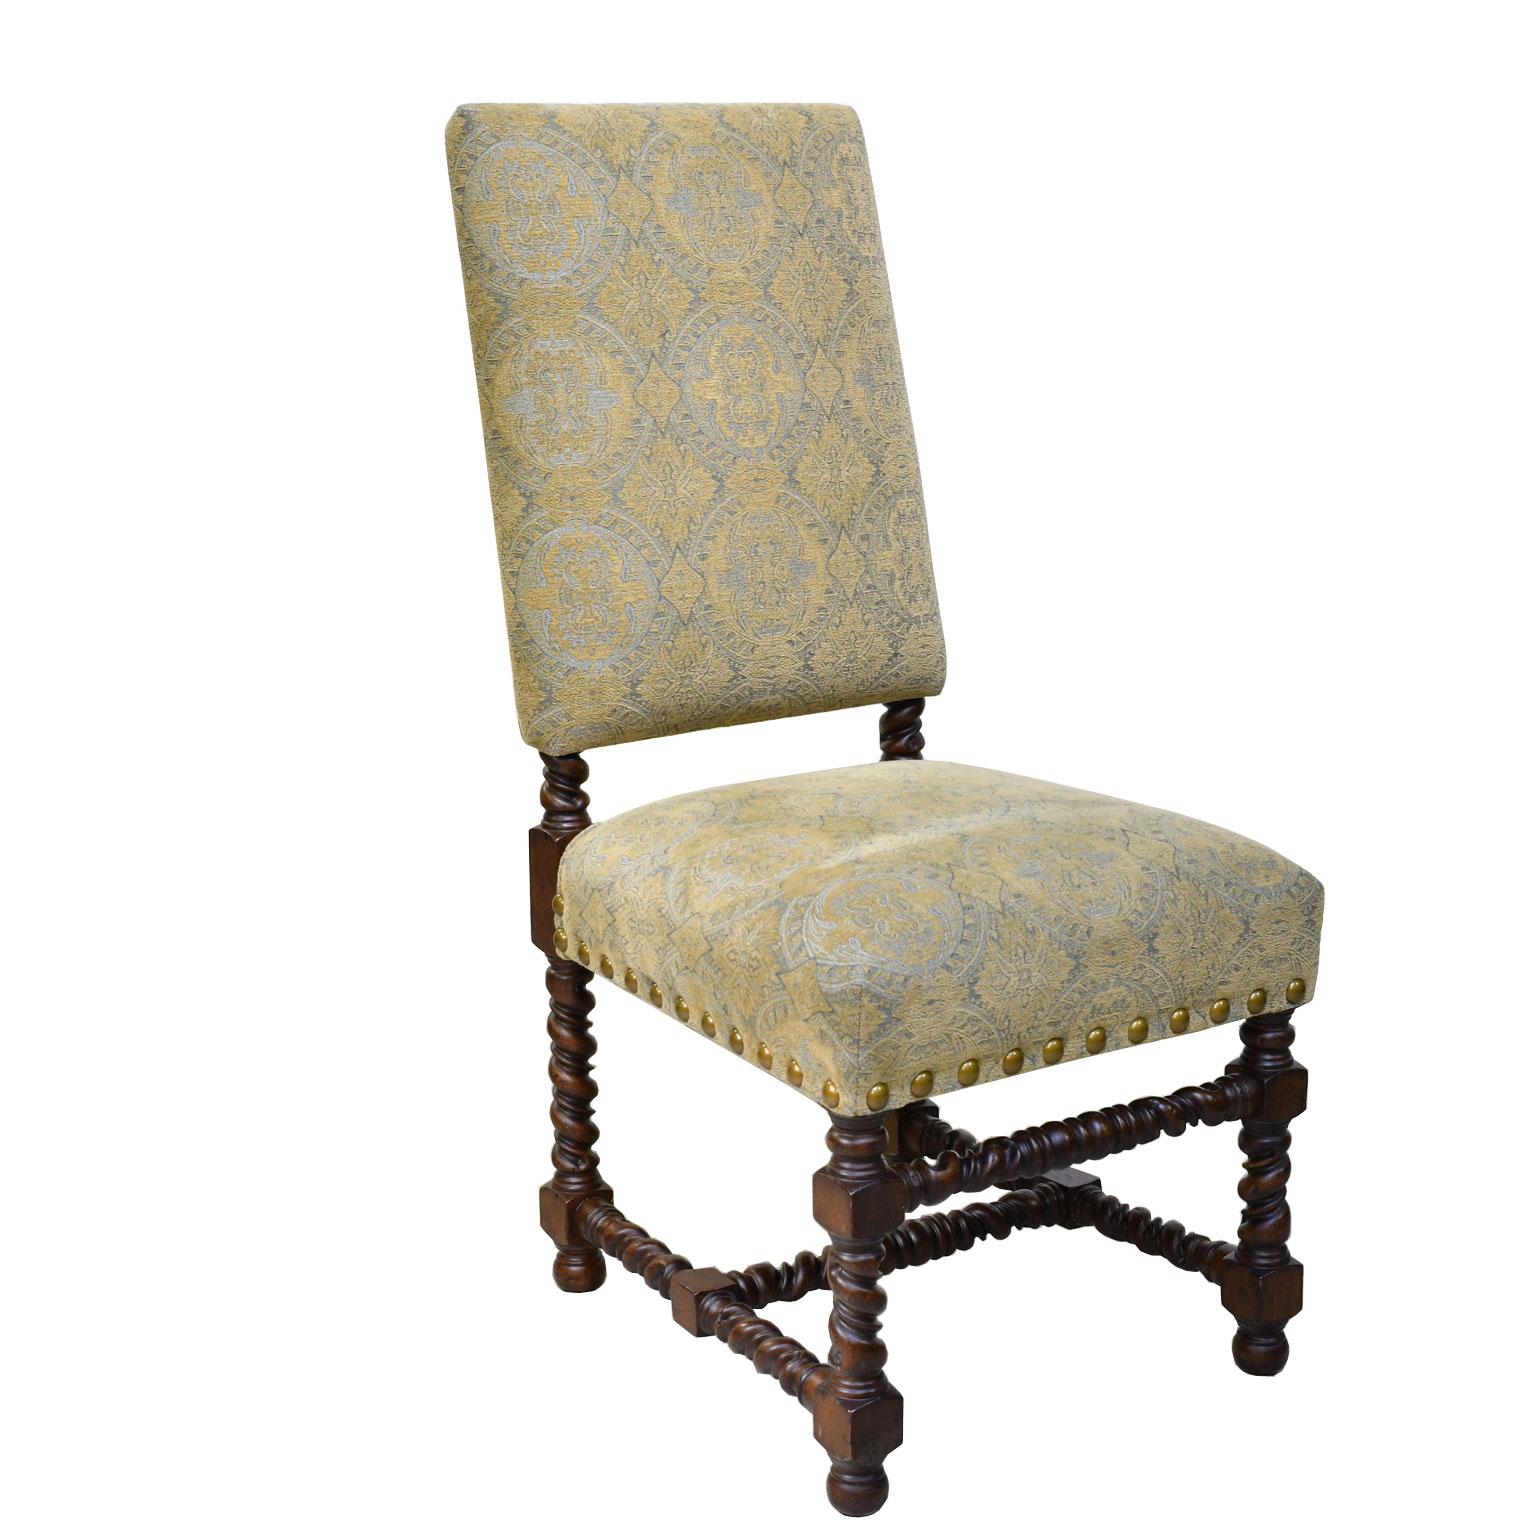 Upholstery Set of Ten Upholstered Tudor-Style Dining Chairs with Turned Legs & Stretcher